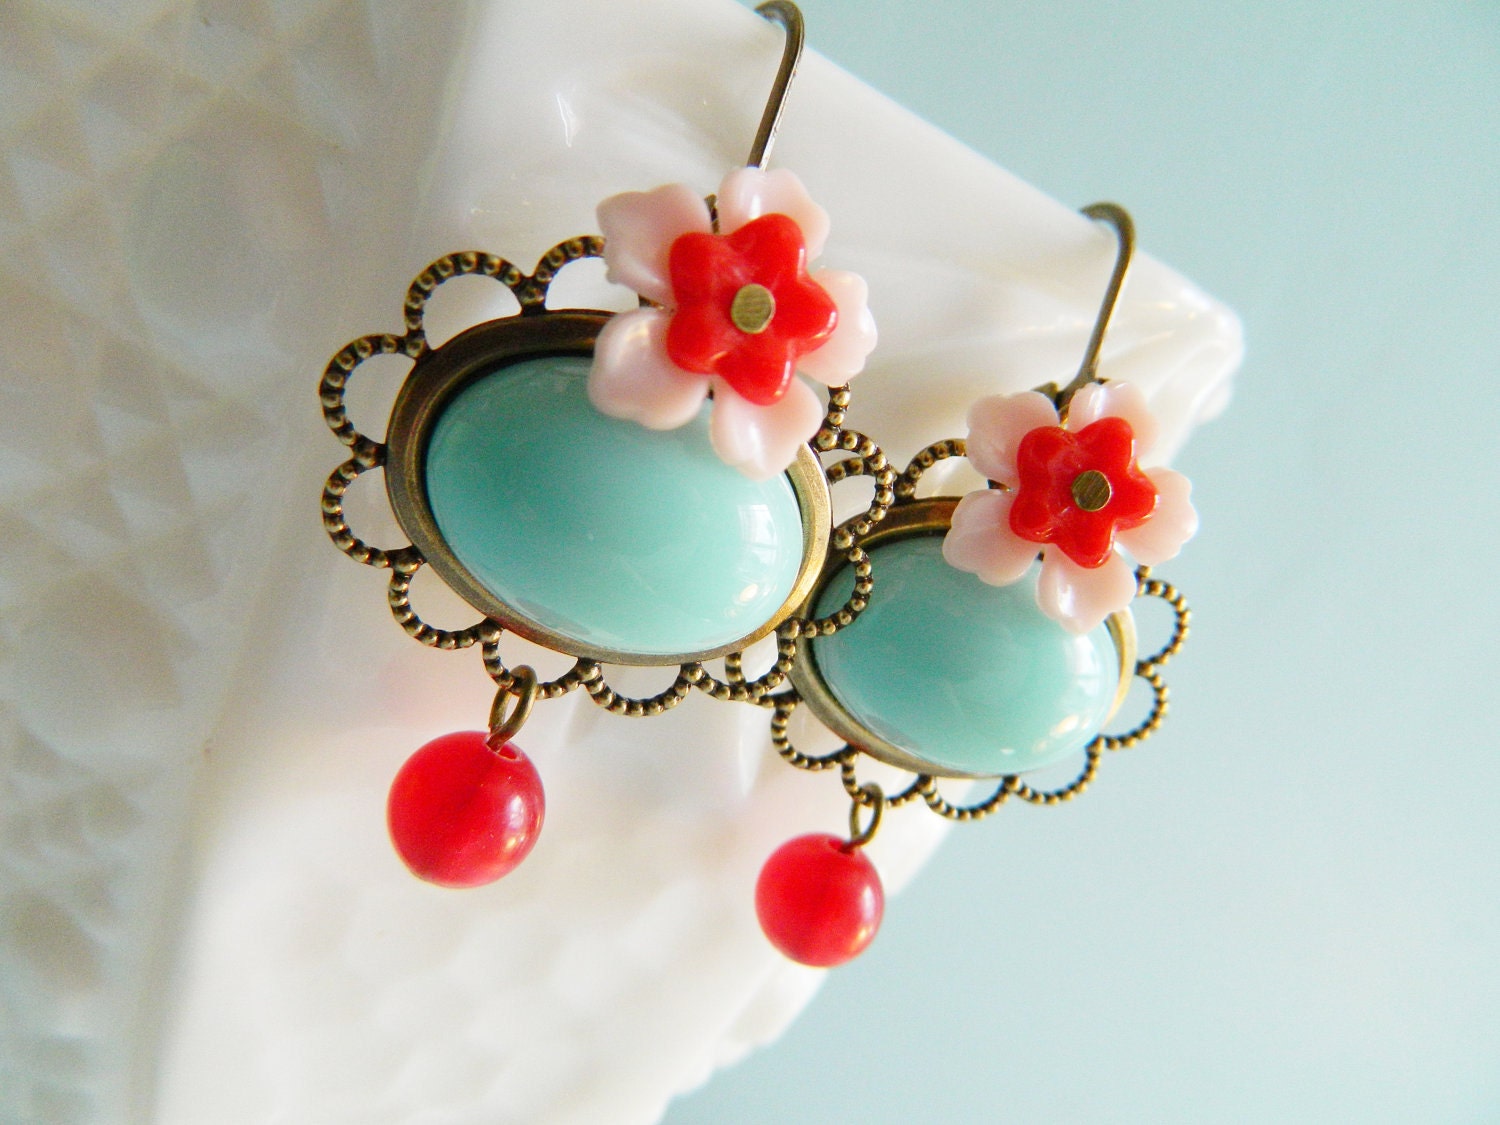 Retro Dangle Earrings in Mint Pink and Red - Sea Breeze Sensation